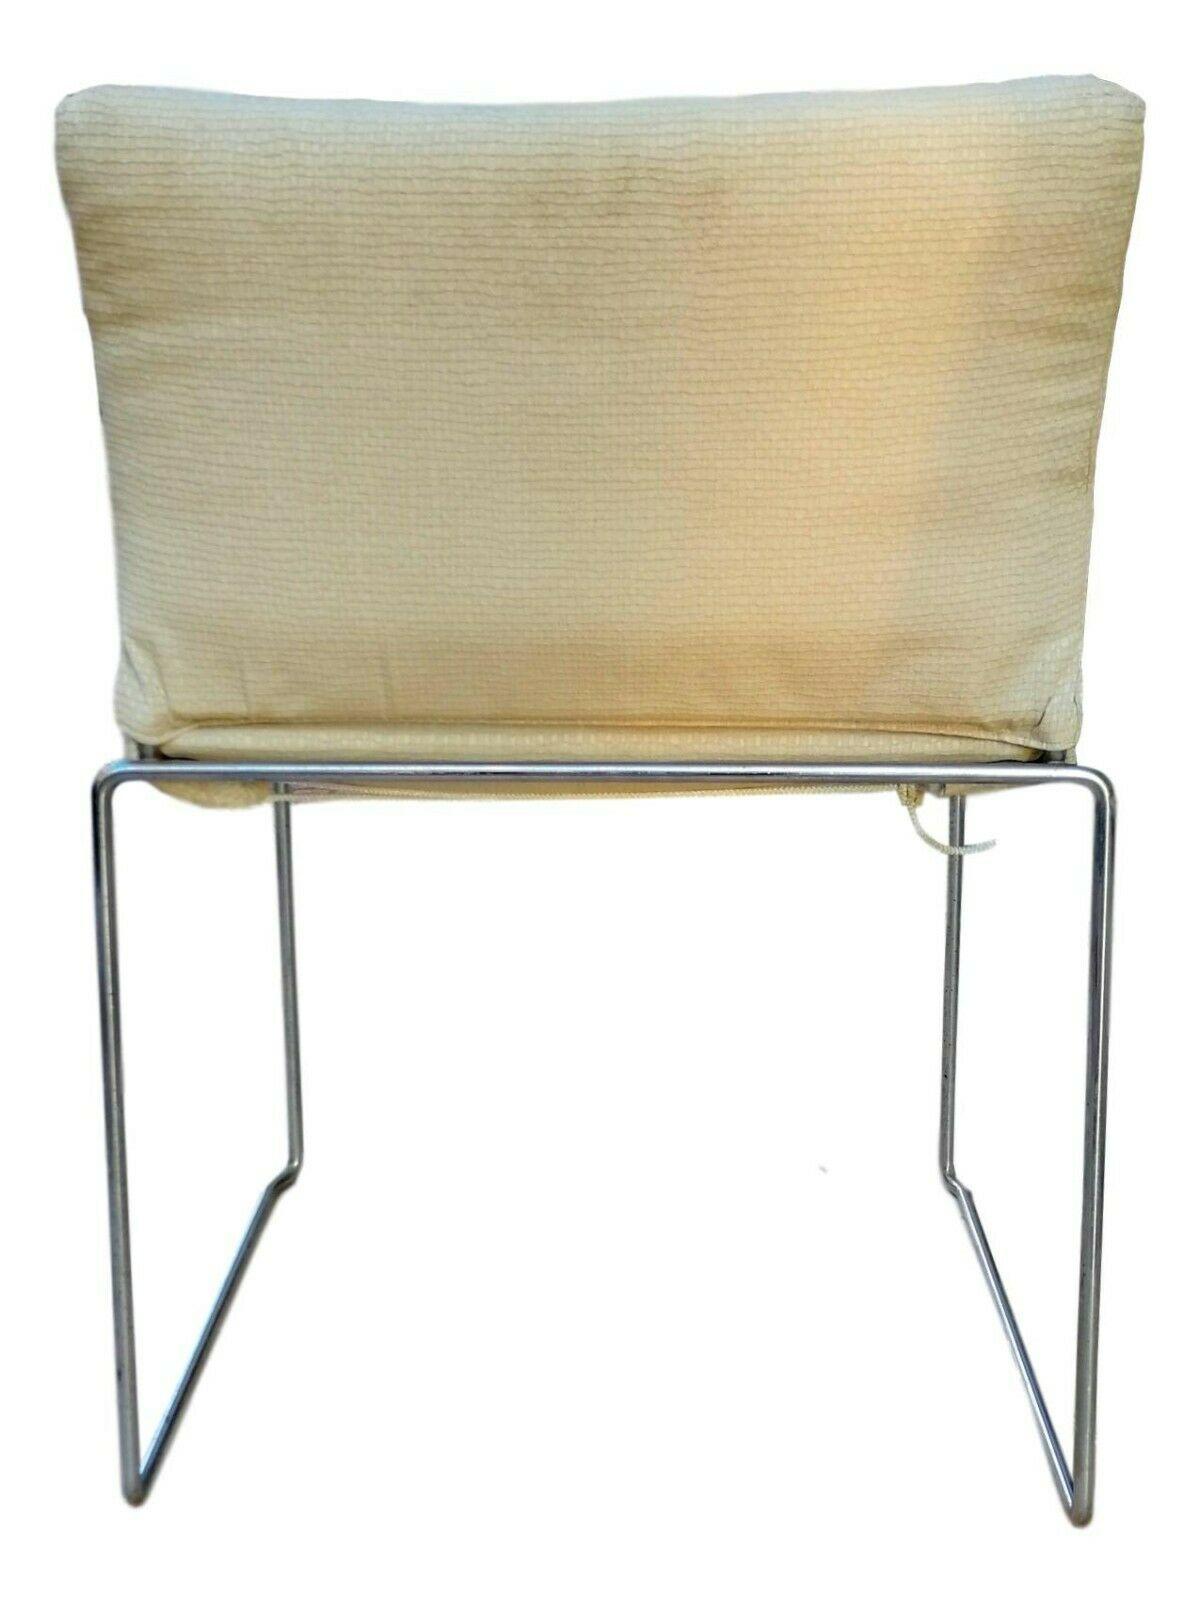 Rare chair model jano design kazuide takahama for Simon gavina , 1970s 

Structure in tubular steel and seat and back upholstery in fabric

Height 81 cm, width 53 cm, depth 54 cm, seat height from the ground 46 cm

Very good condition, as